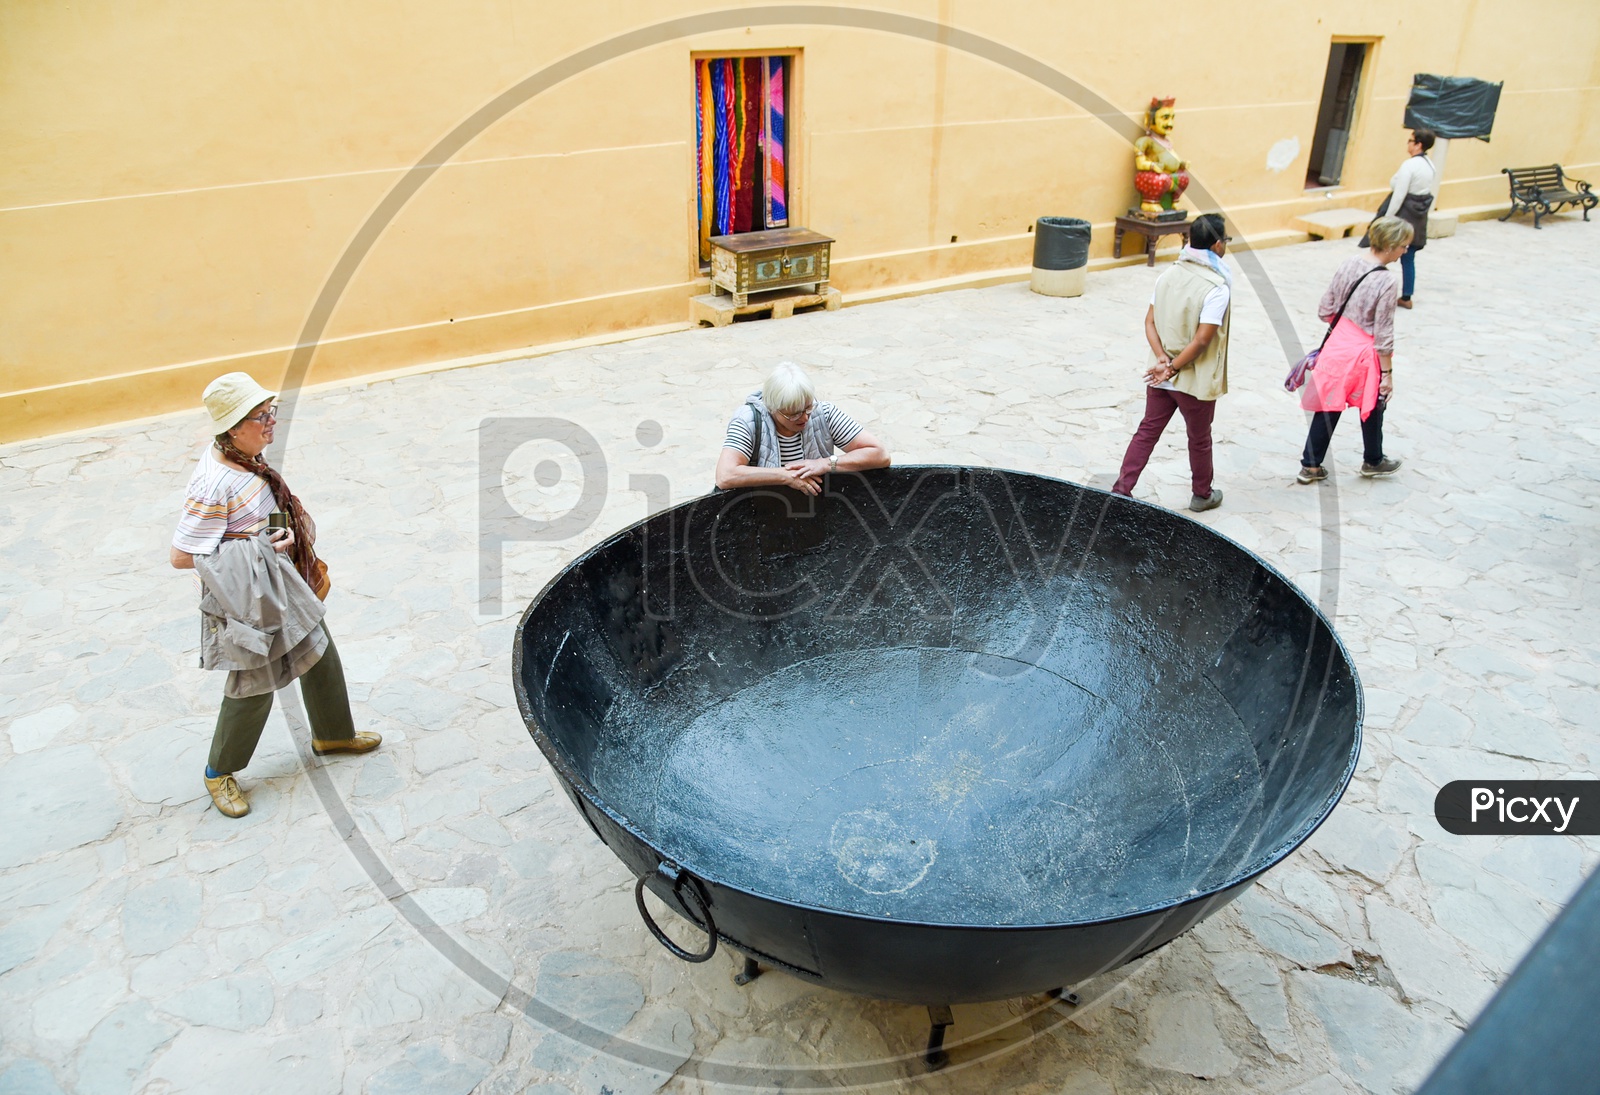 Tourist admiring large cooking vessel at Amer Fort